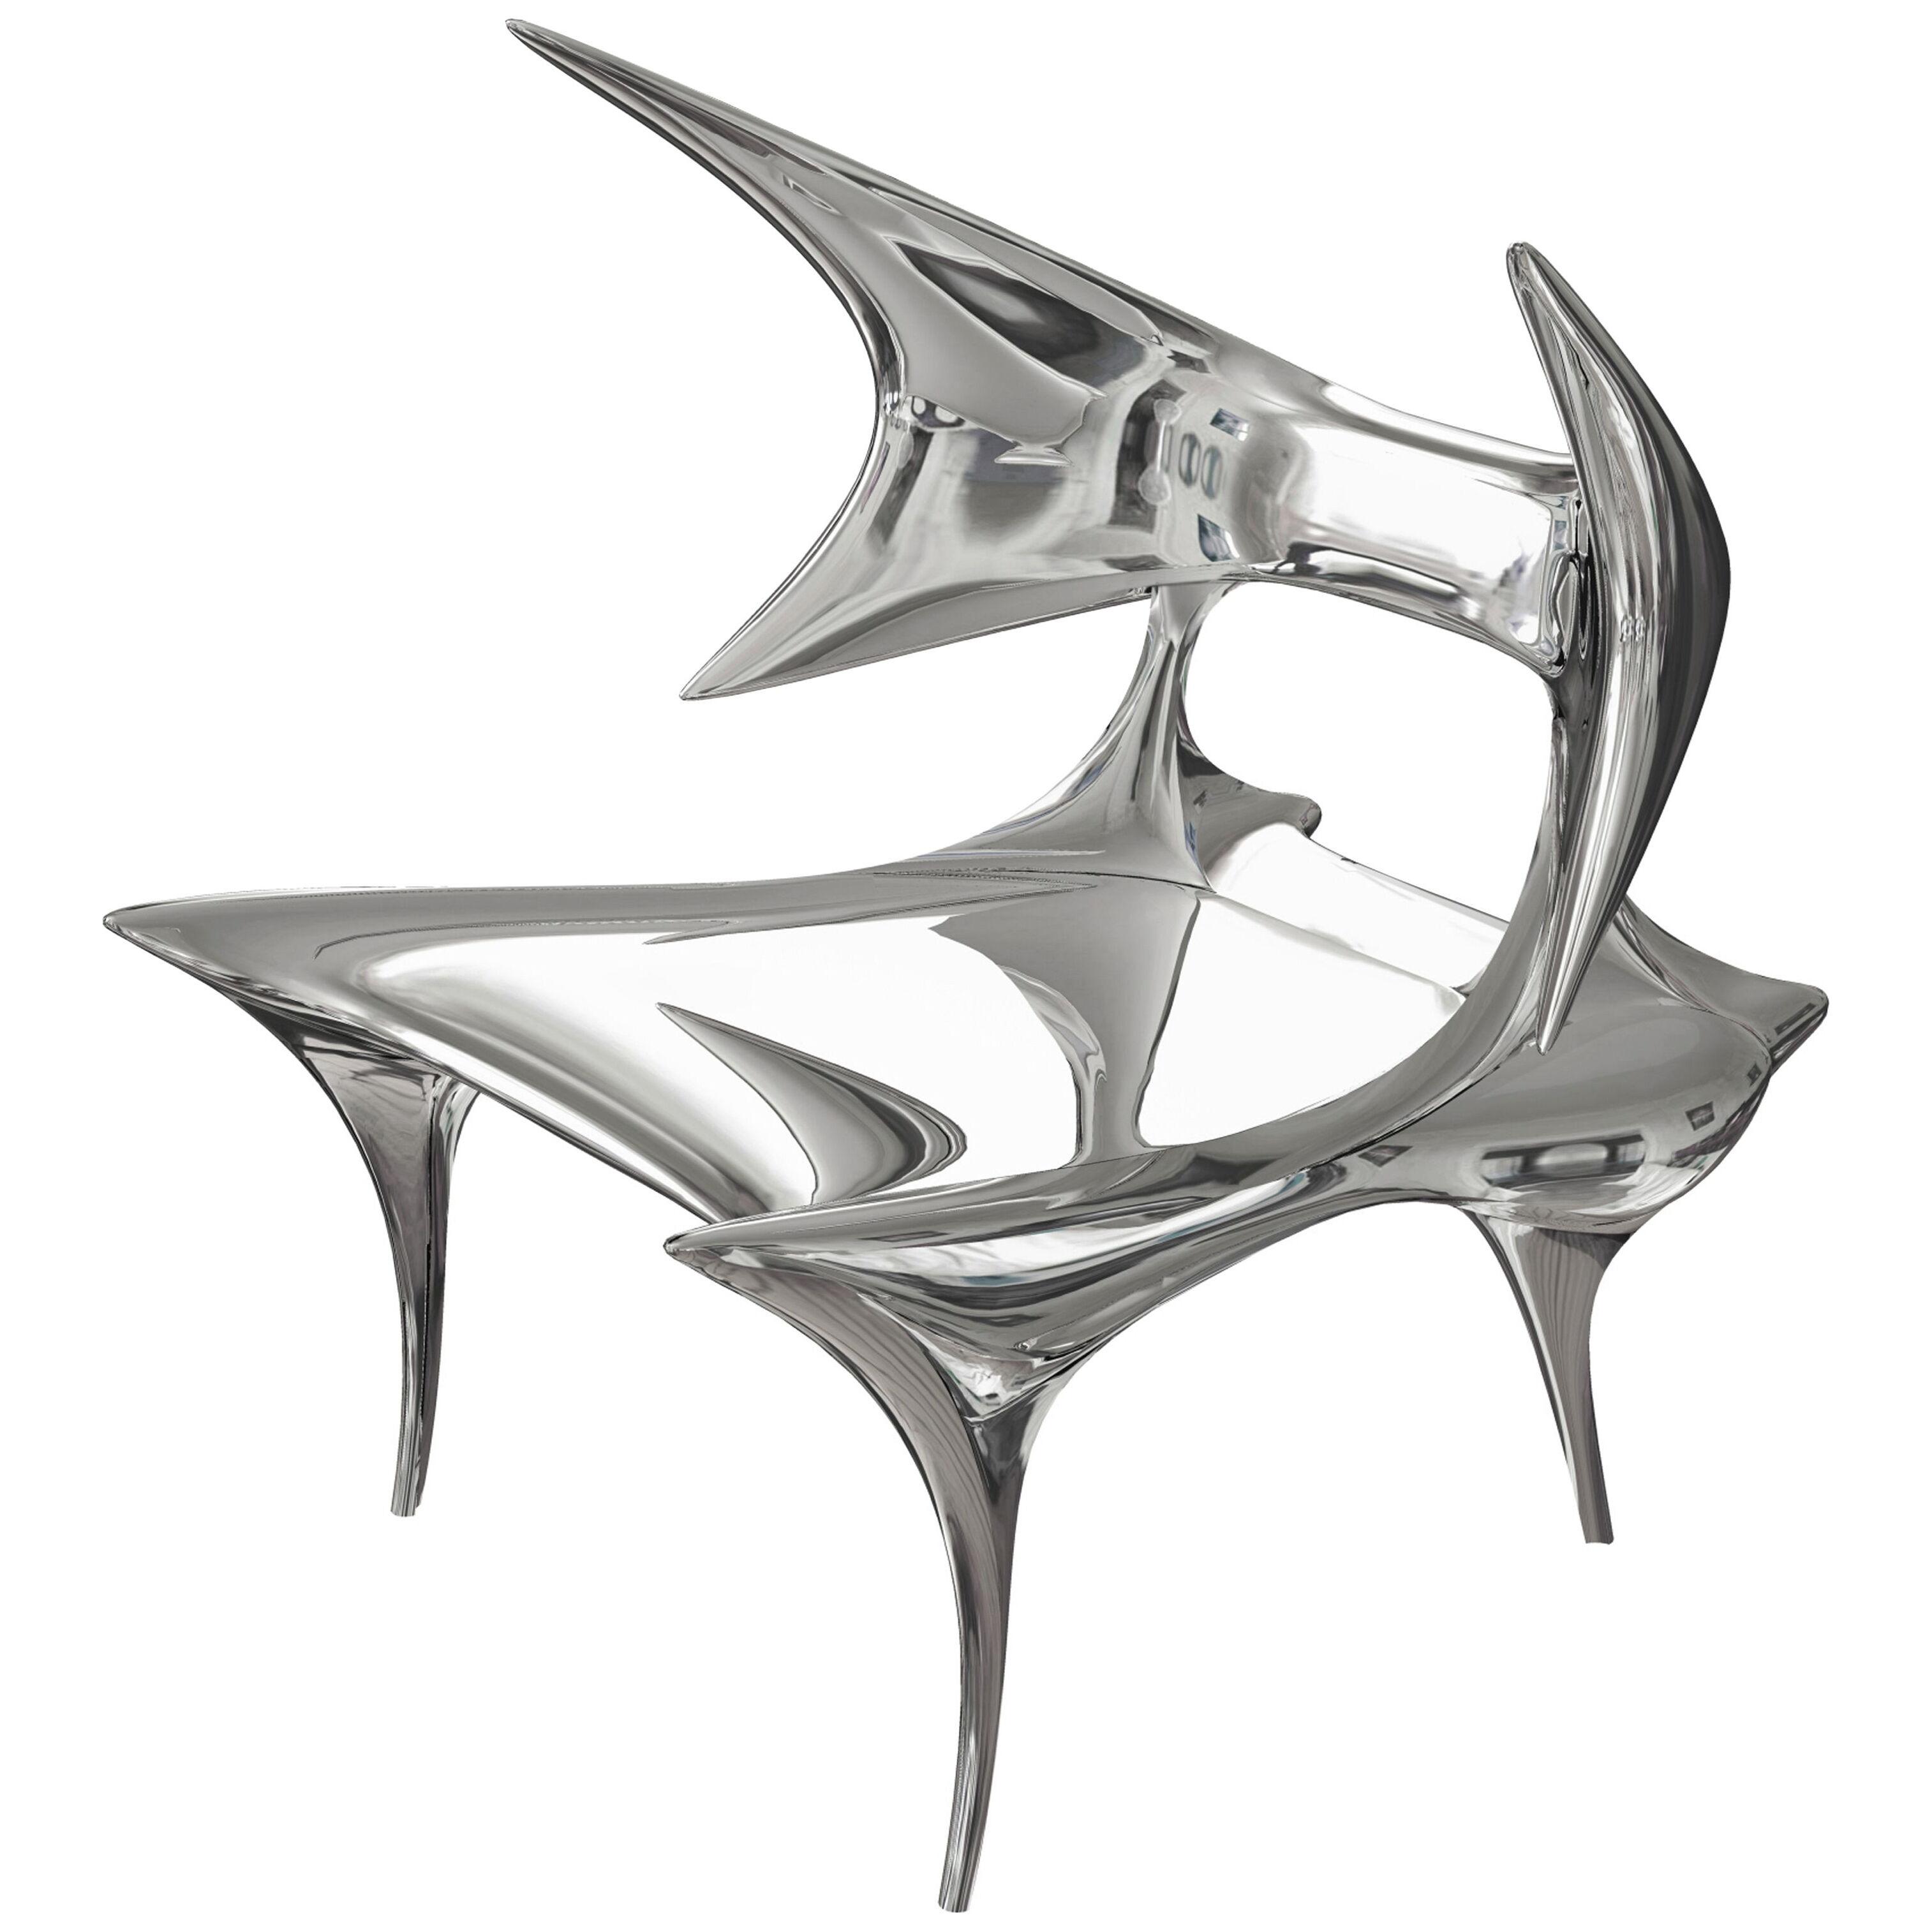  Darboux chair in mirror polished cast stainless steel by Craig Van Den Brulle